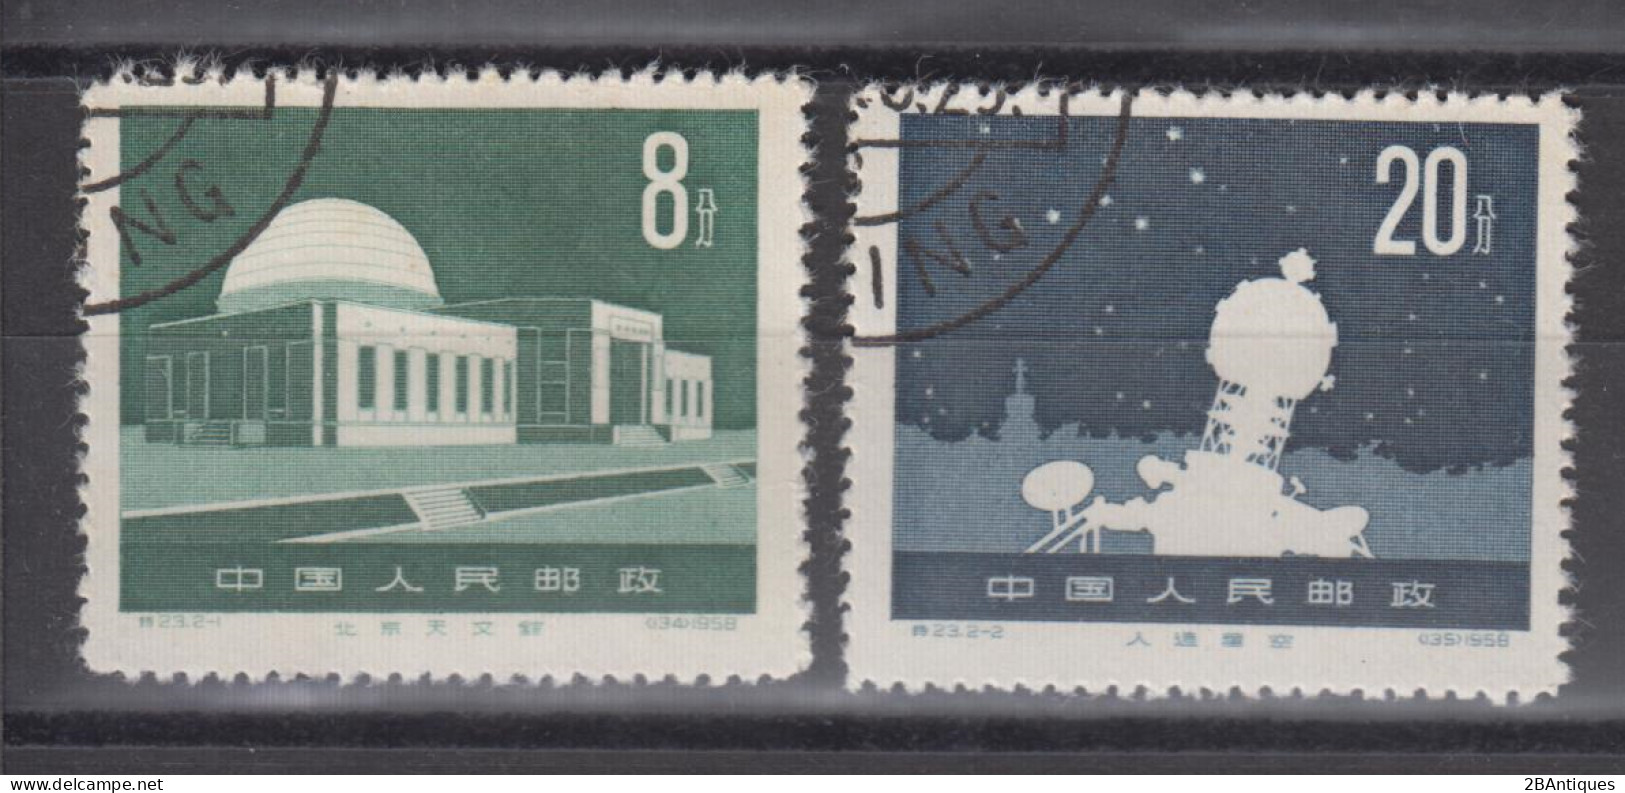 PR CHINA 1958 - Beijing Planetarium CTO XF With Very Nice Cancellation! - Used Stamps